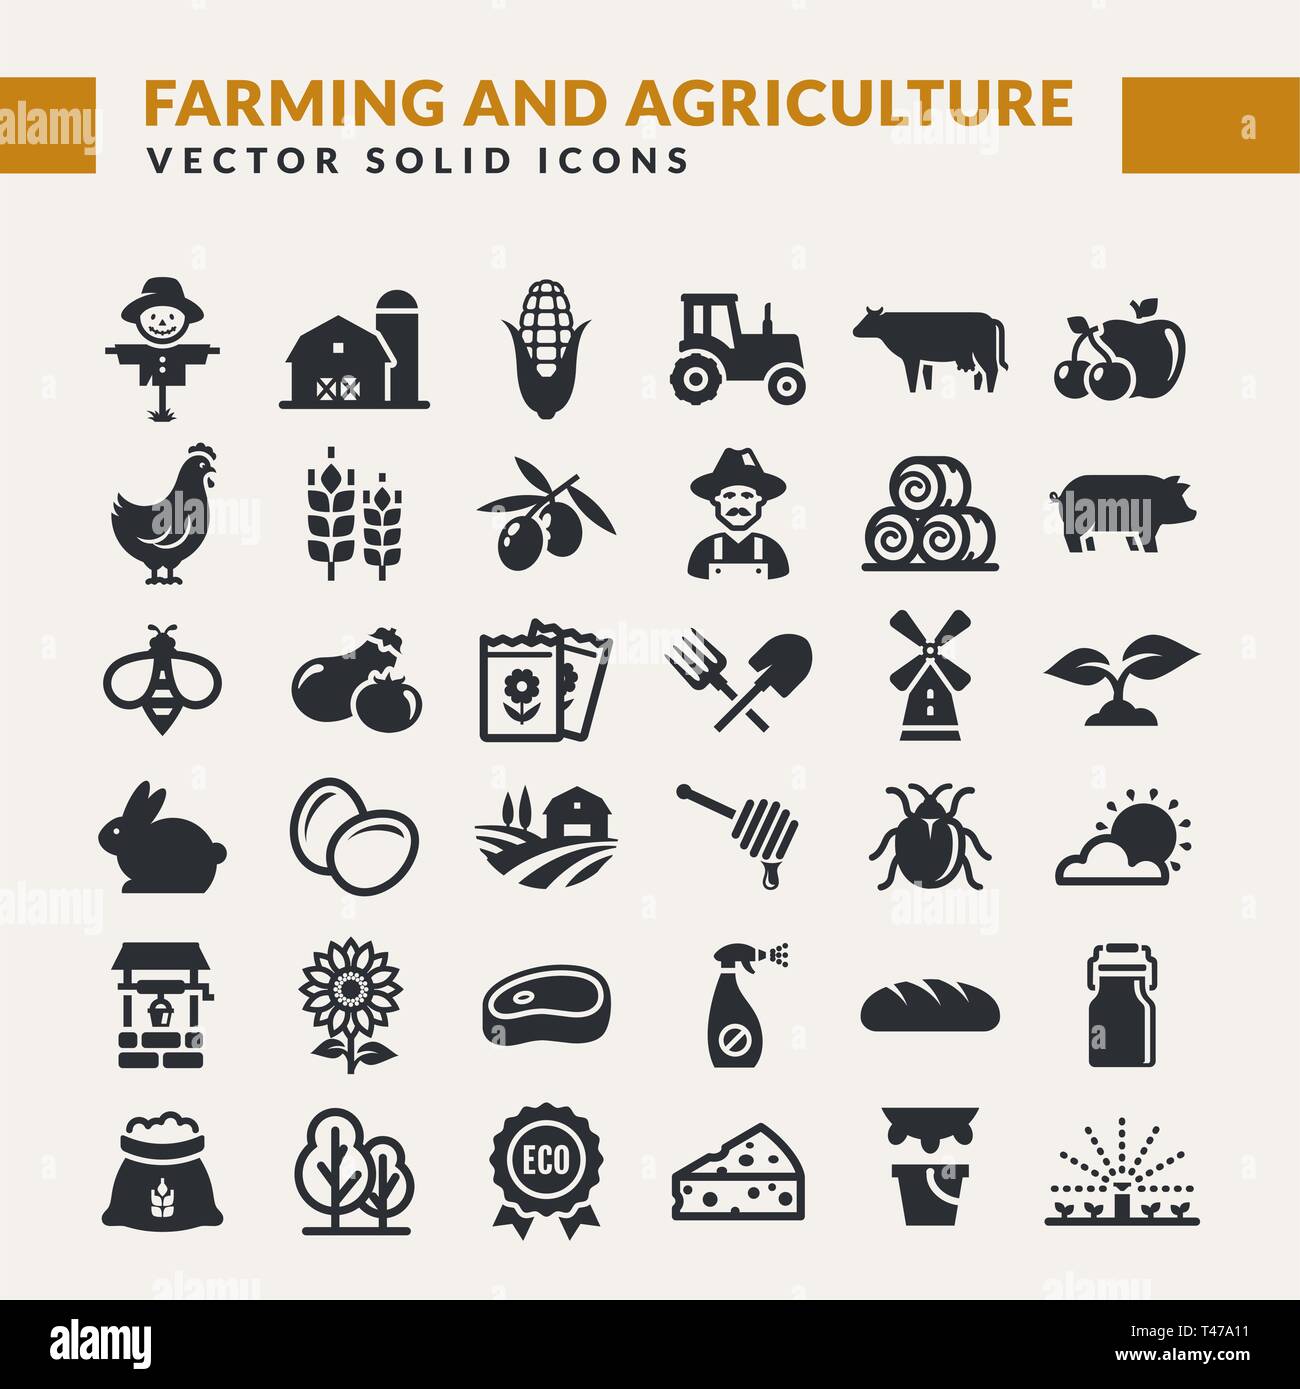 Farming and agriculture icon set. Vector isolated farm and countryside symbols: cereal crop, fruit, vegetables, dairy products, animals, plants, tools Stock Vector